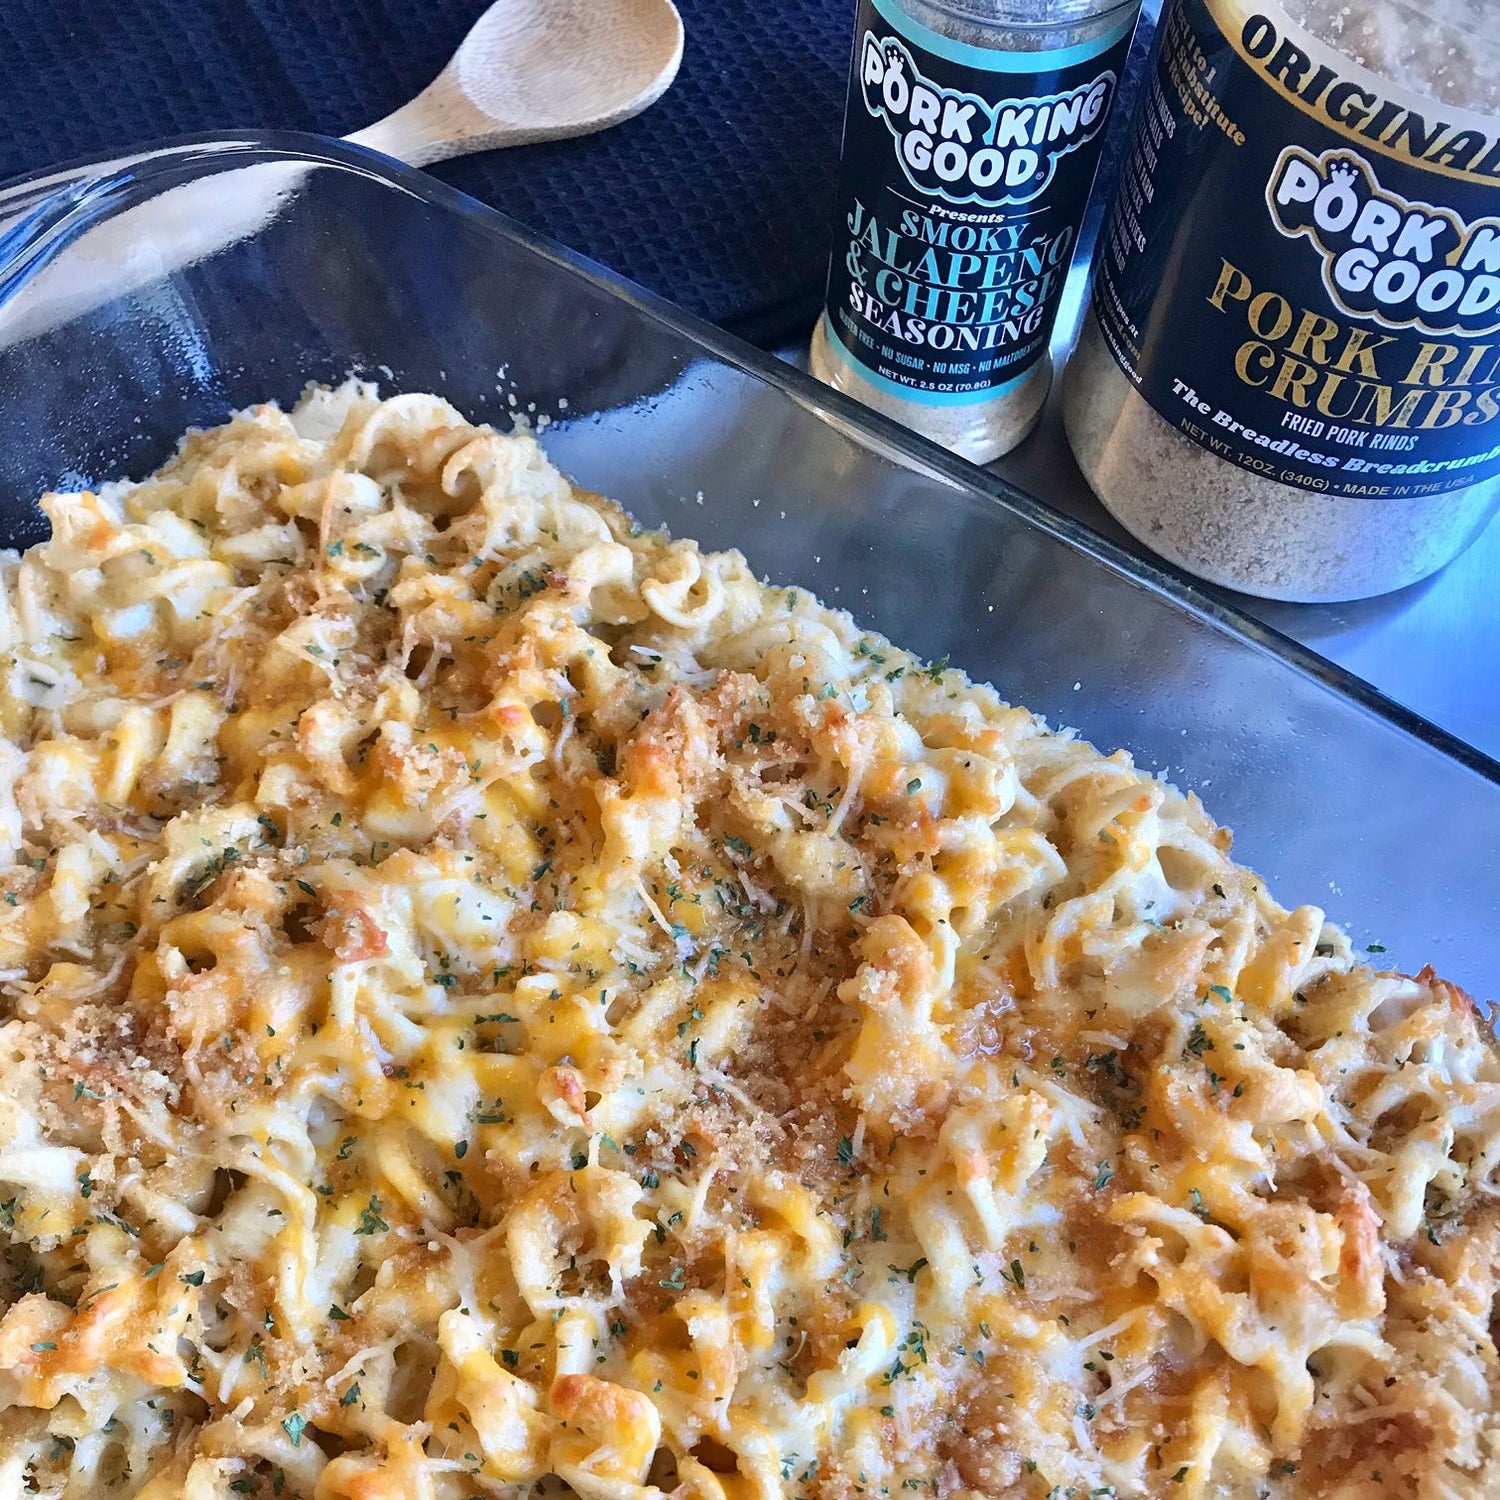 Pork King Good Low Carb Baked Smoky Jalapeno Mac and Cheese